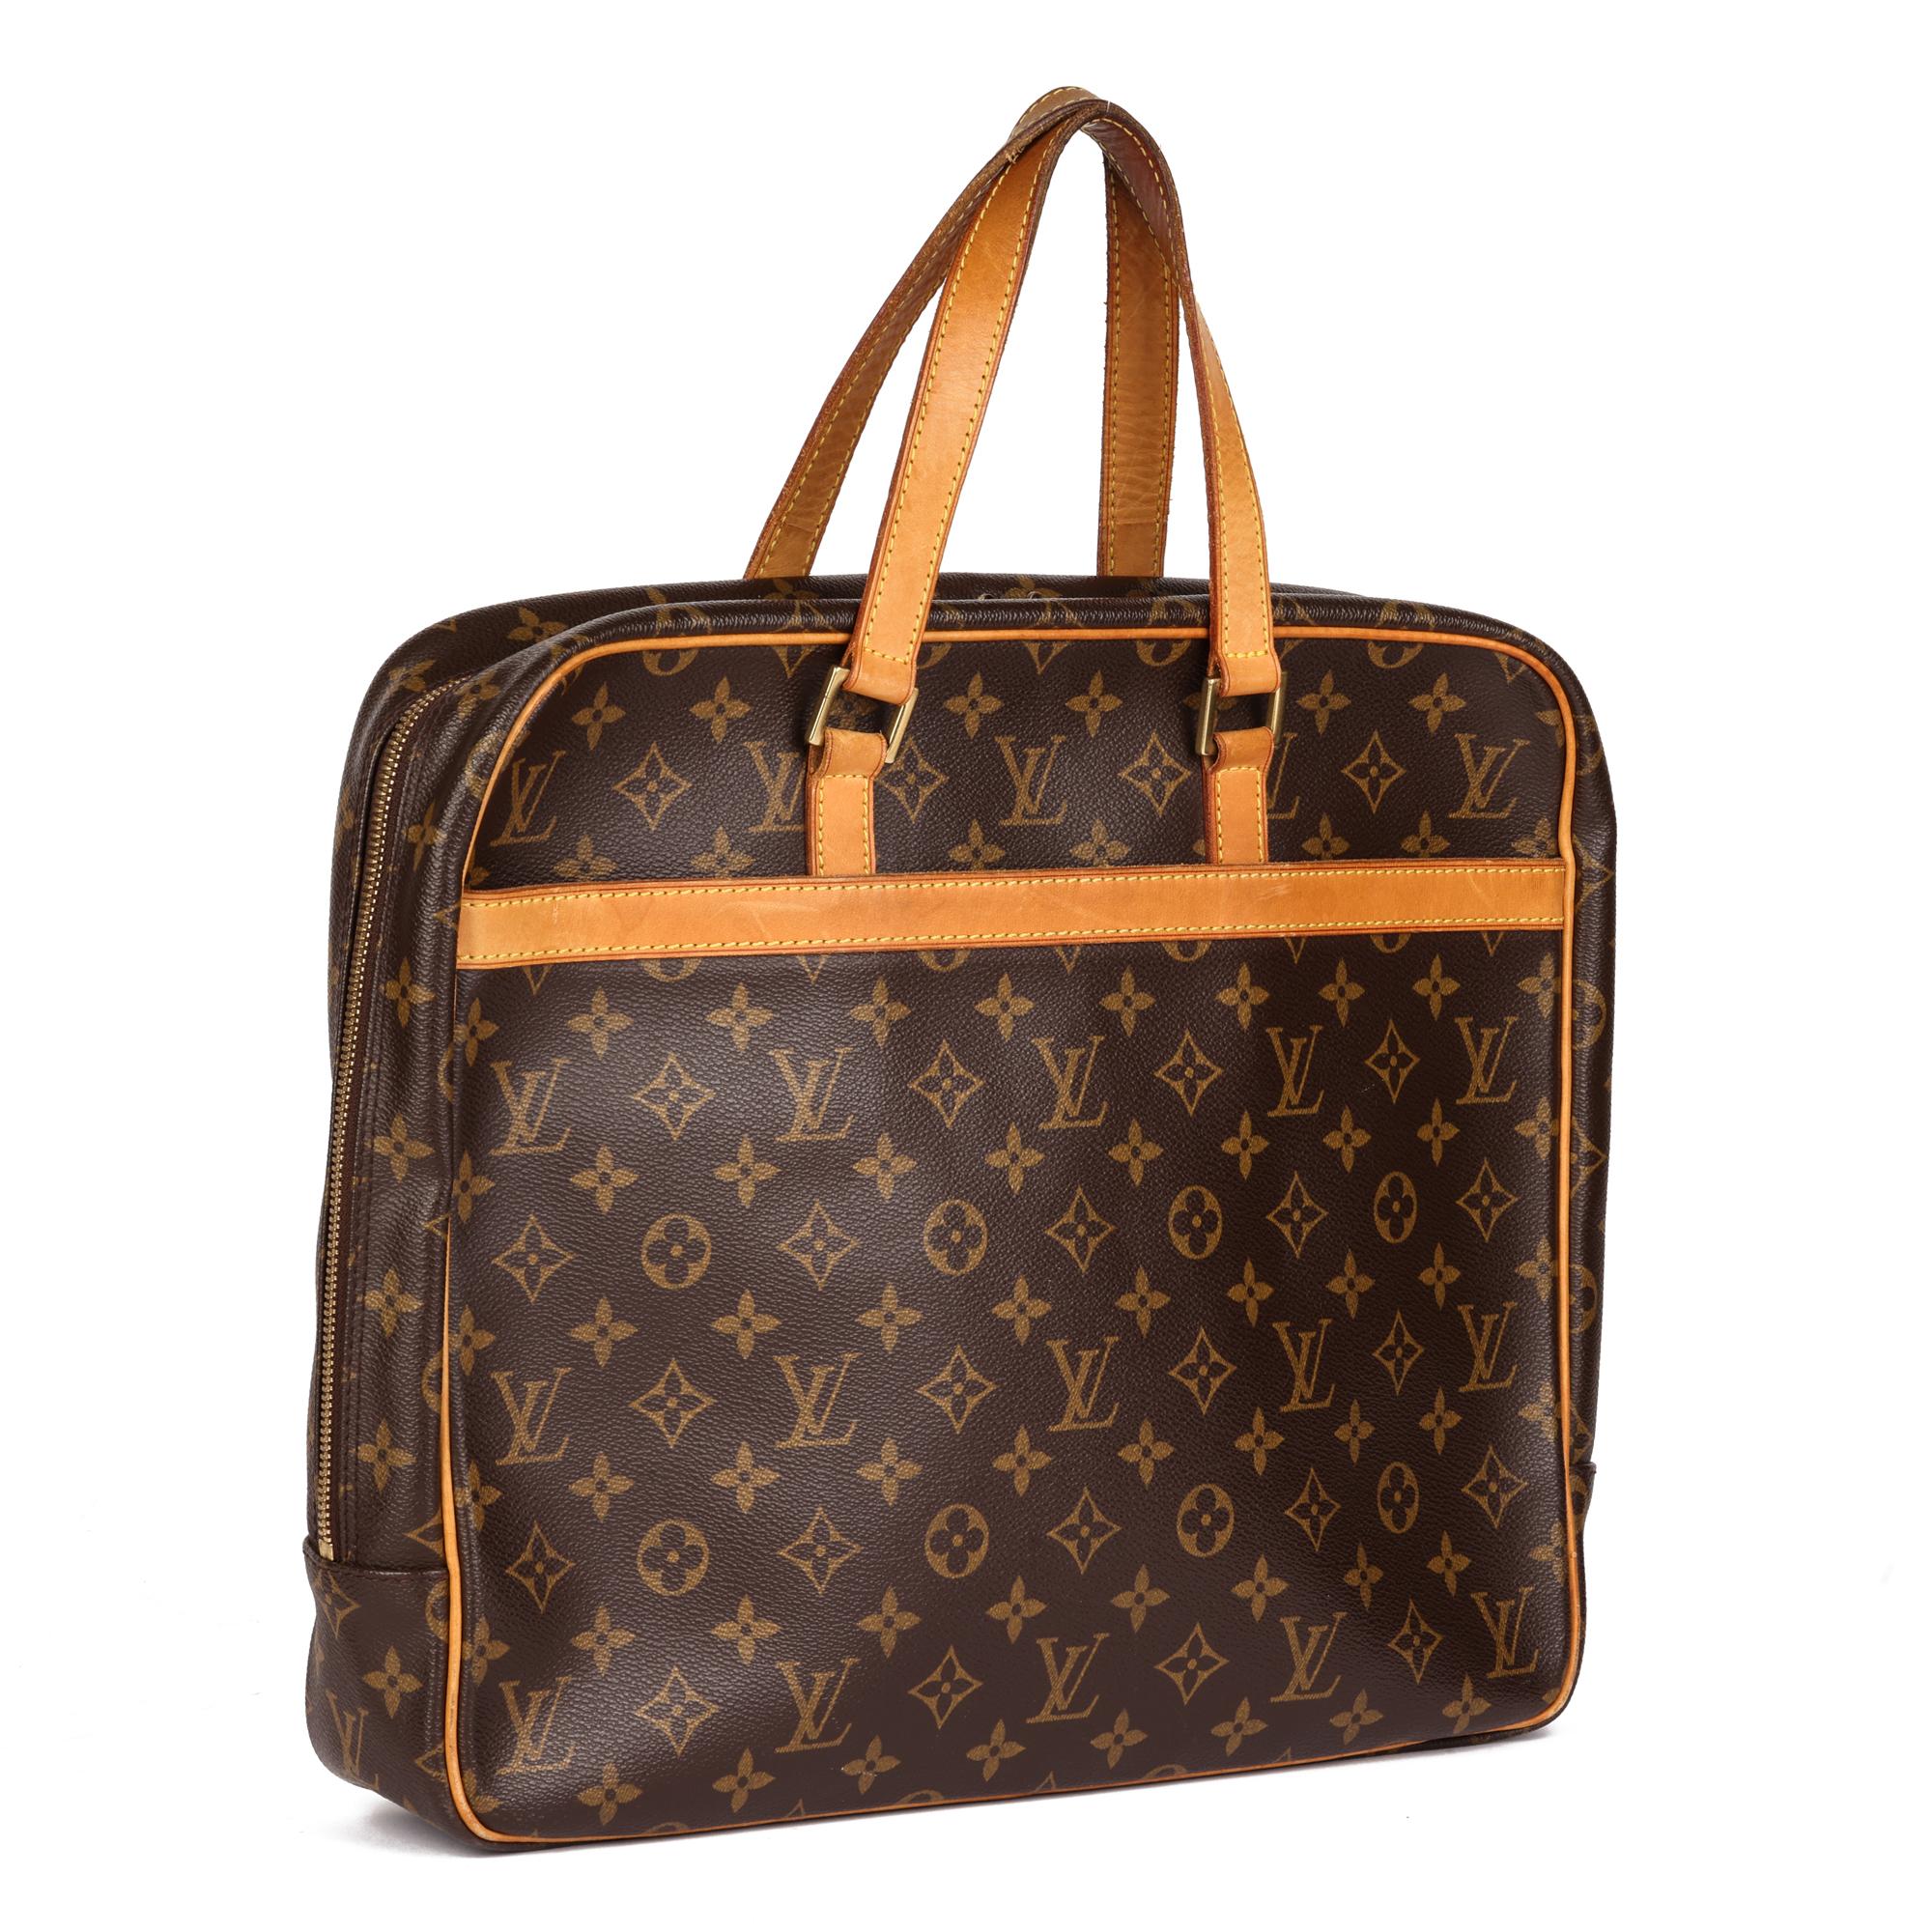 LOUIS VUITTON
Brown Monogram Coated Canvas & Vachetta Leather Vintage Porte Documents Pegase

Serial Number: MB 0034
Age (Circa): 2004
Accompanied By: Louis Vuitton Dust Bag
Authenticity Details: Date Stamp (Made in France)
Gender: Unisex
Type: